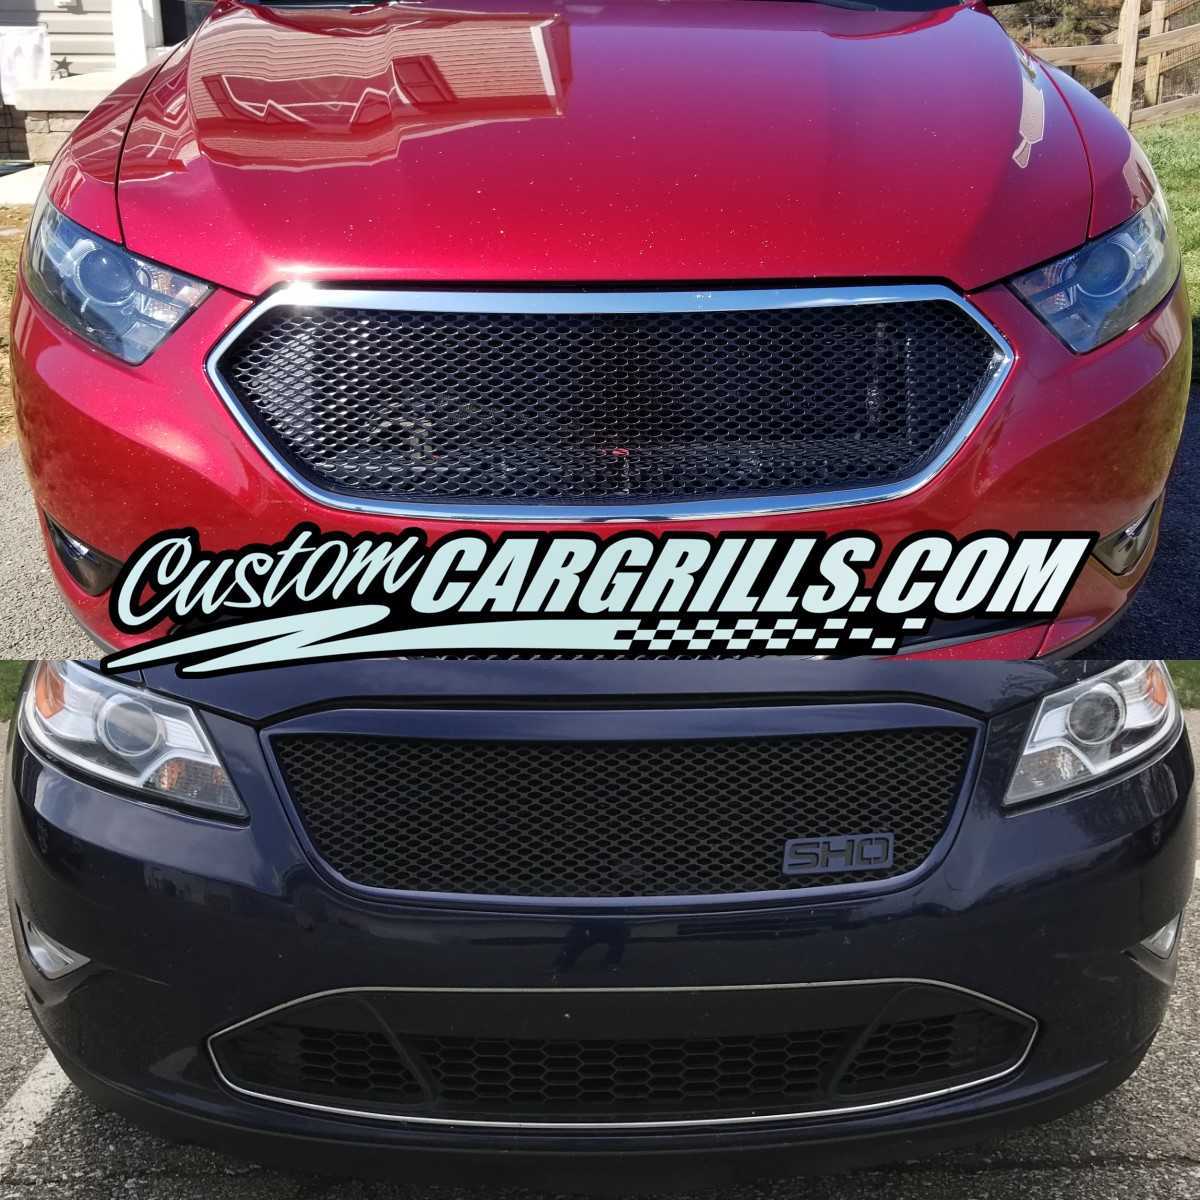 Custom Mesh Grills for Ford Taurus by